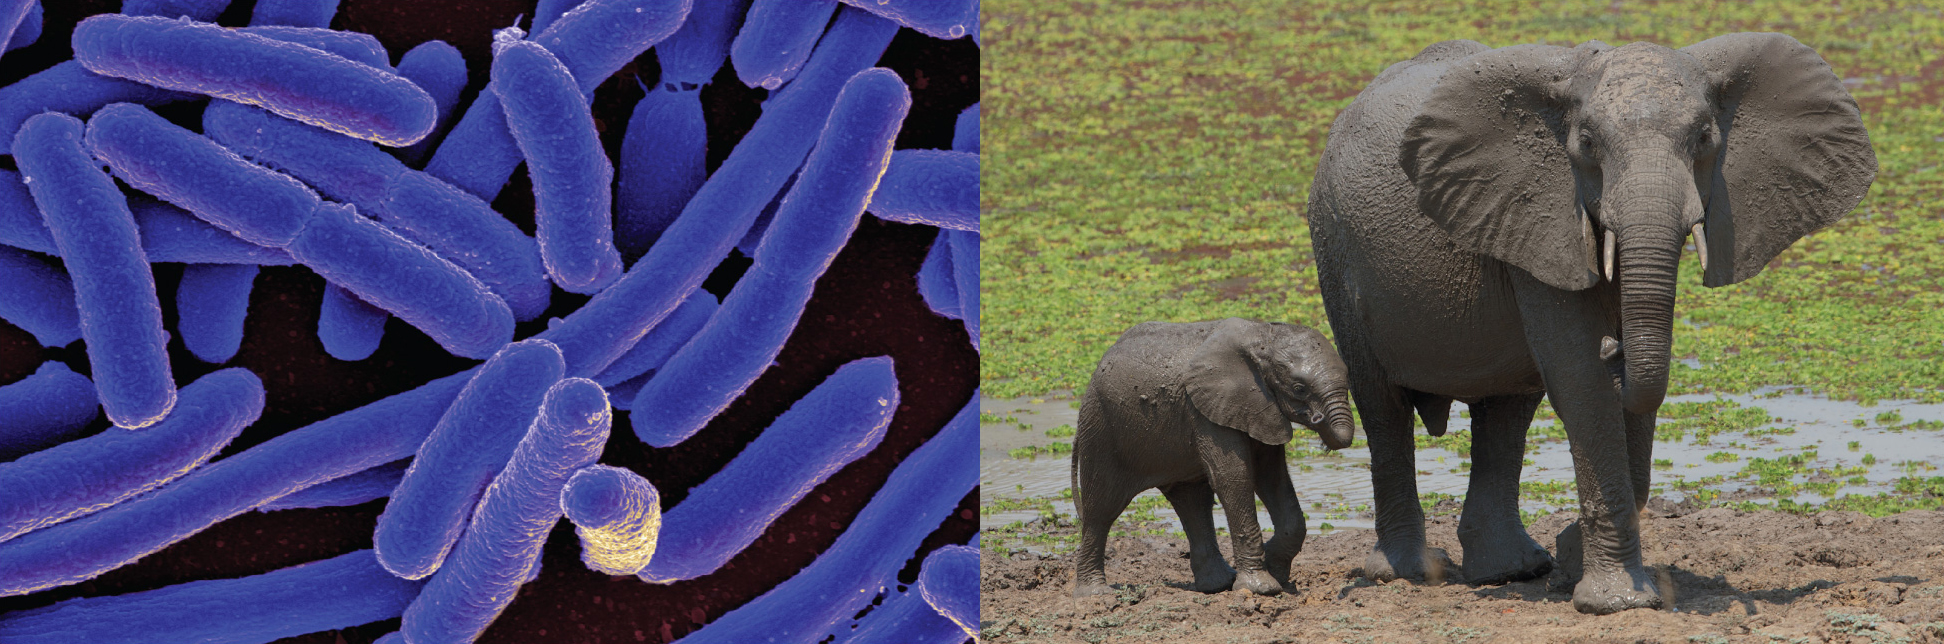 Micrograph of rod shaped cell. Photo of elephants.